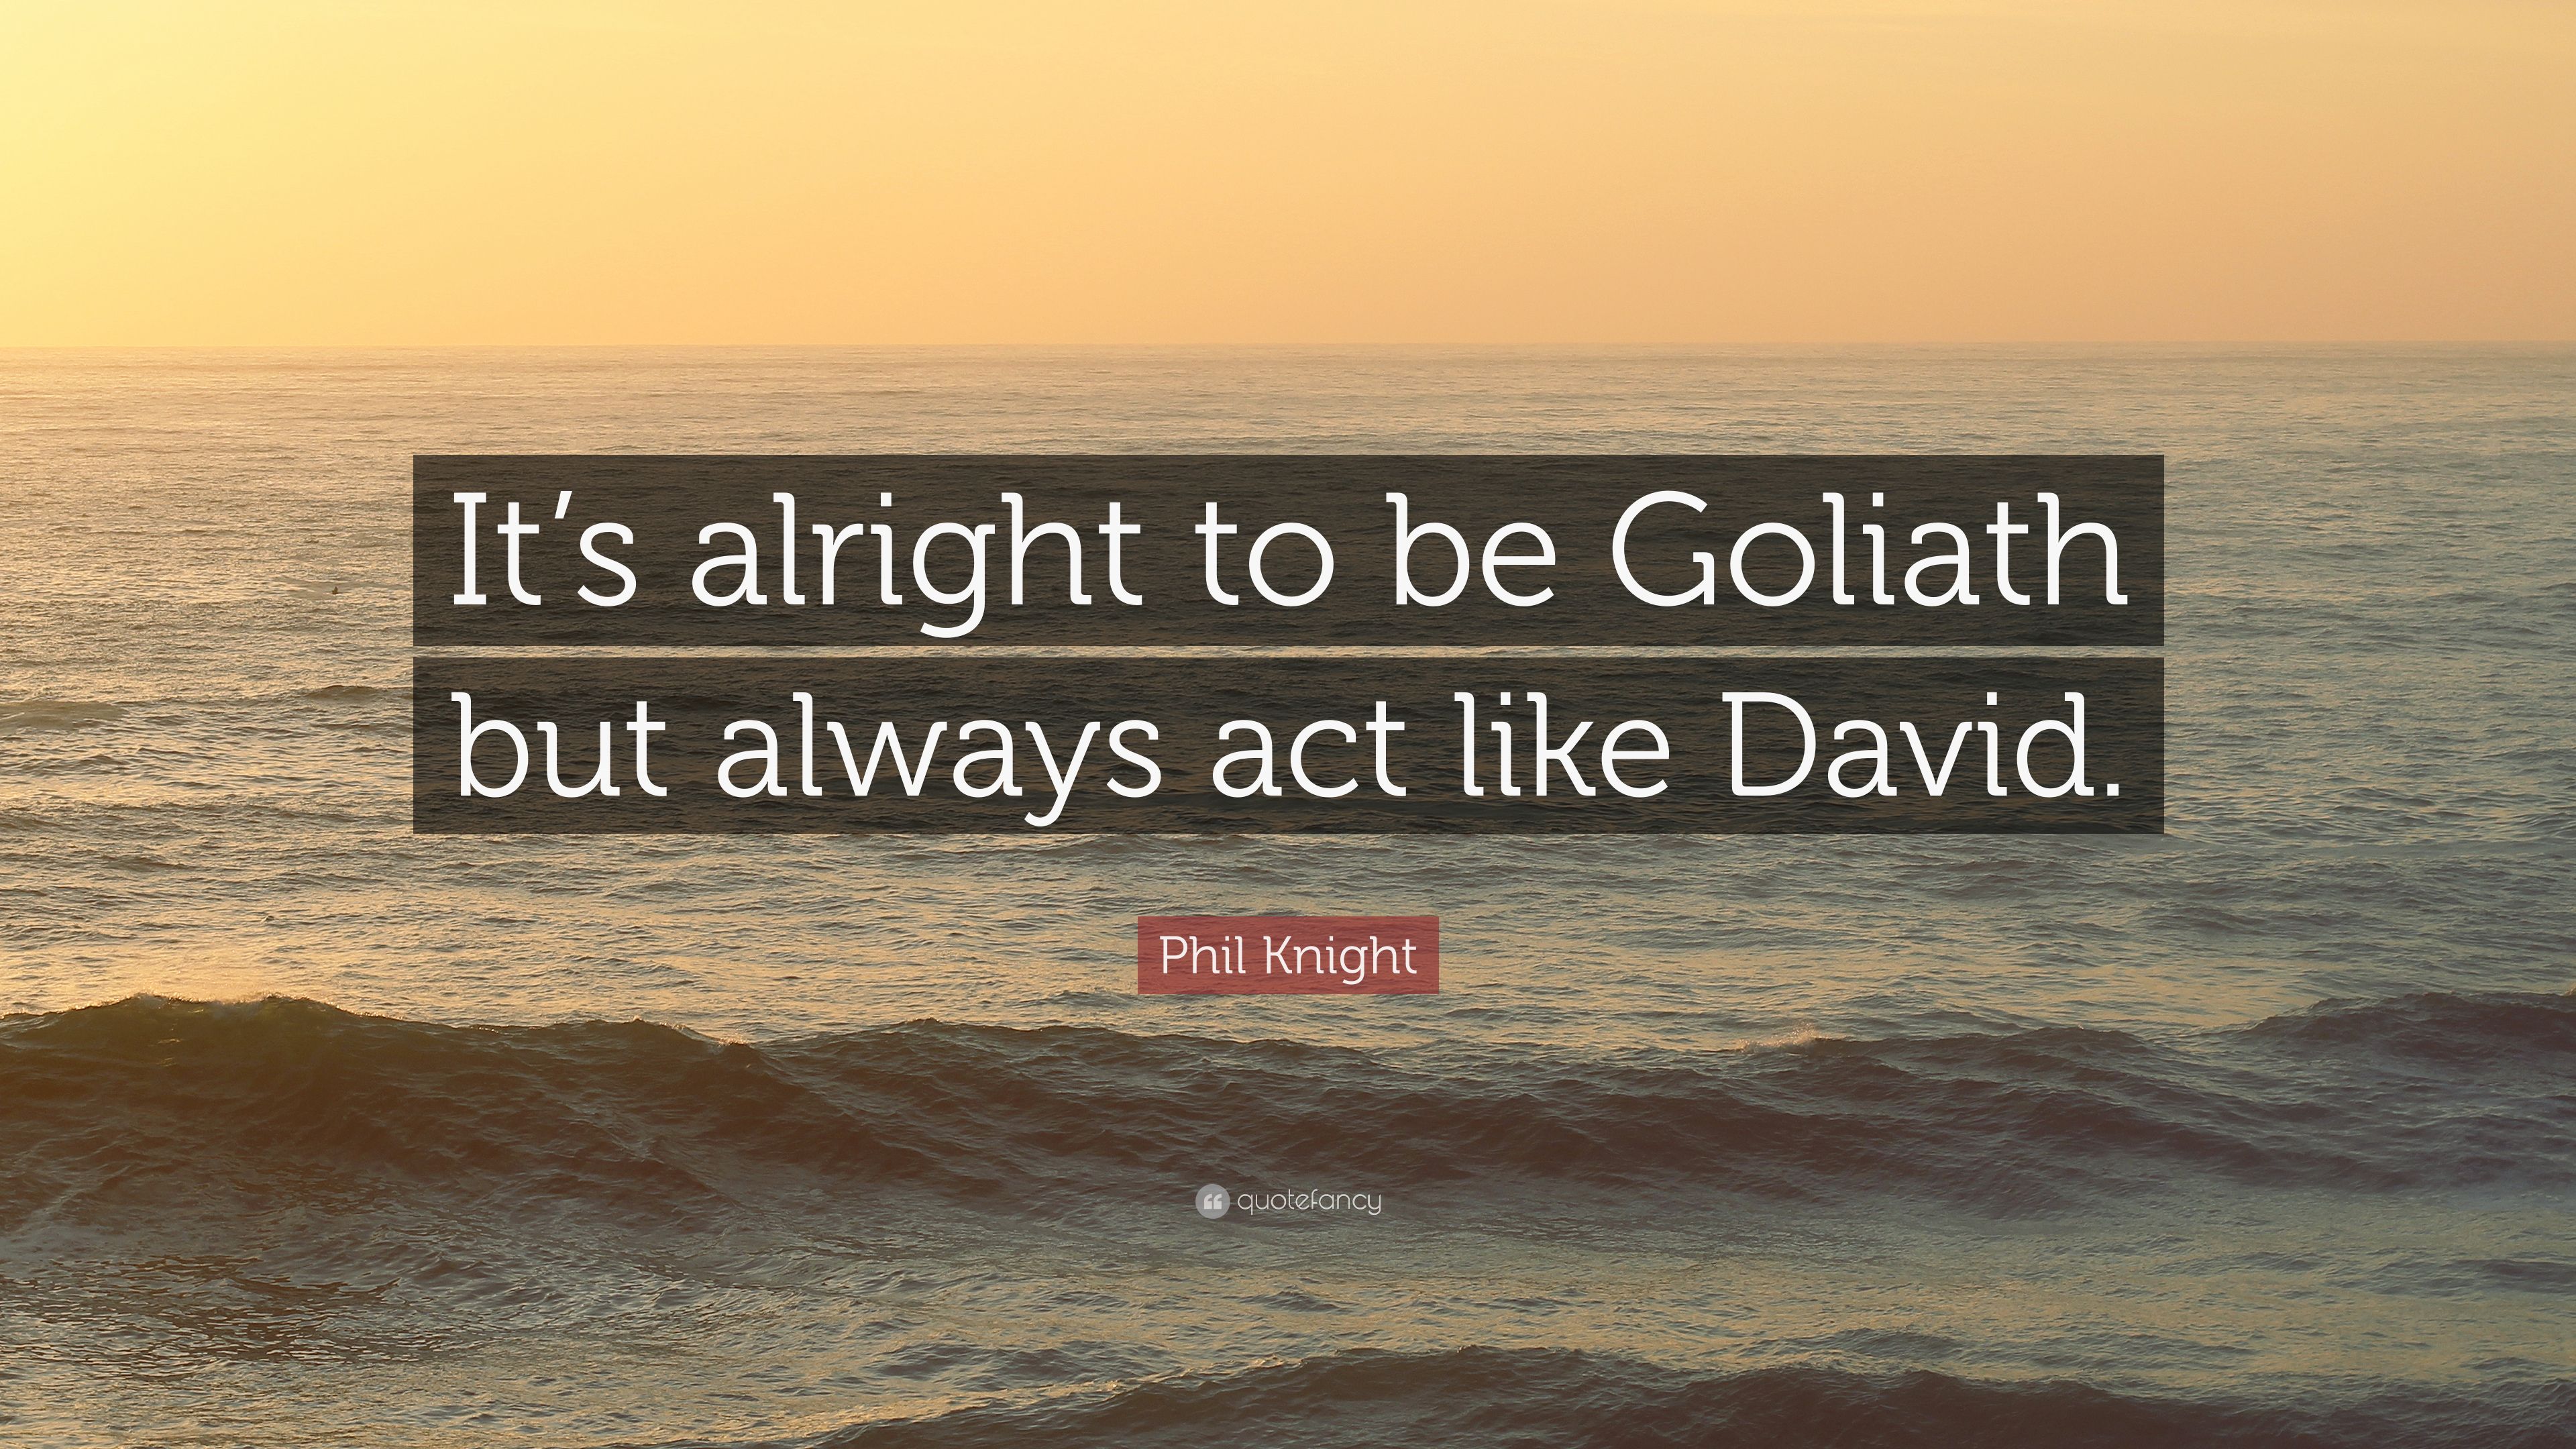 Phil Knight Quote: "It's alright to be Goliath but always act lik...